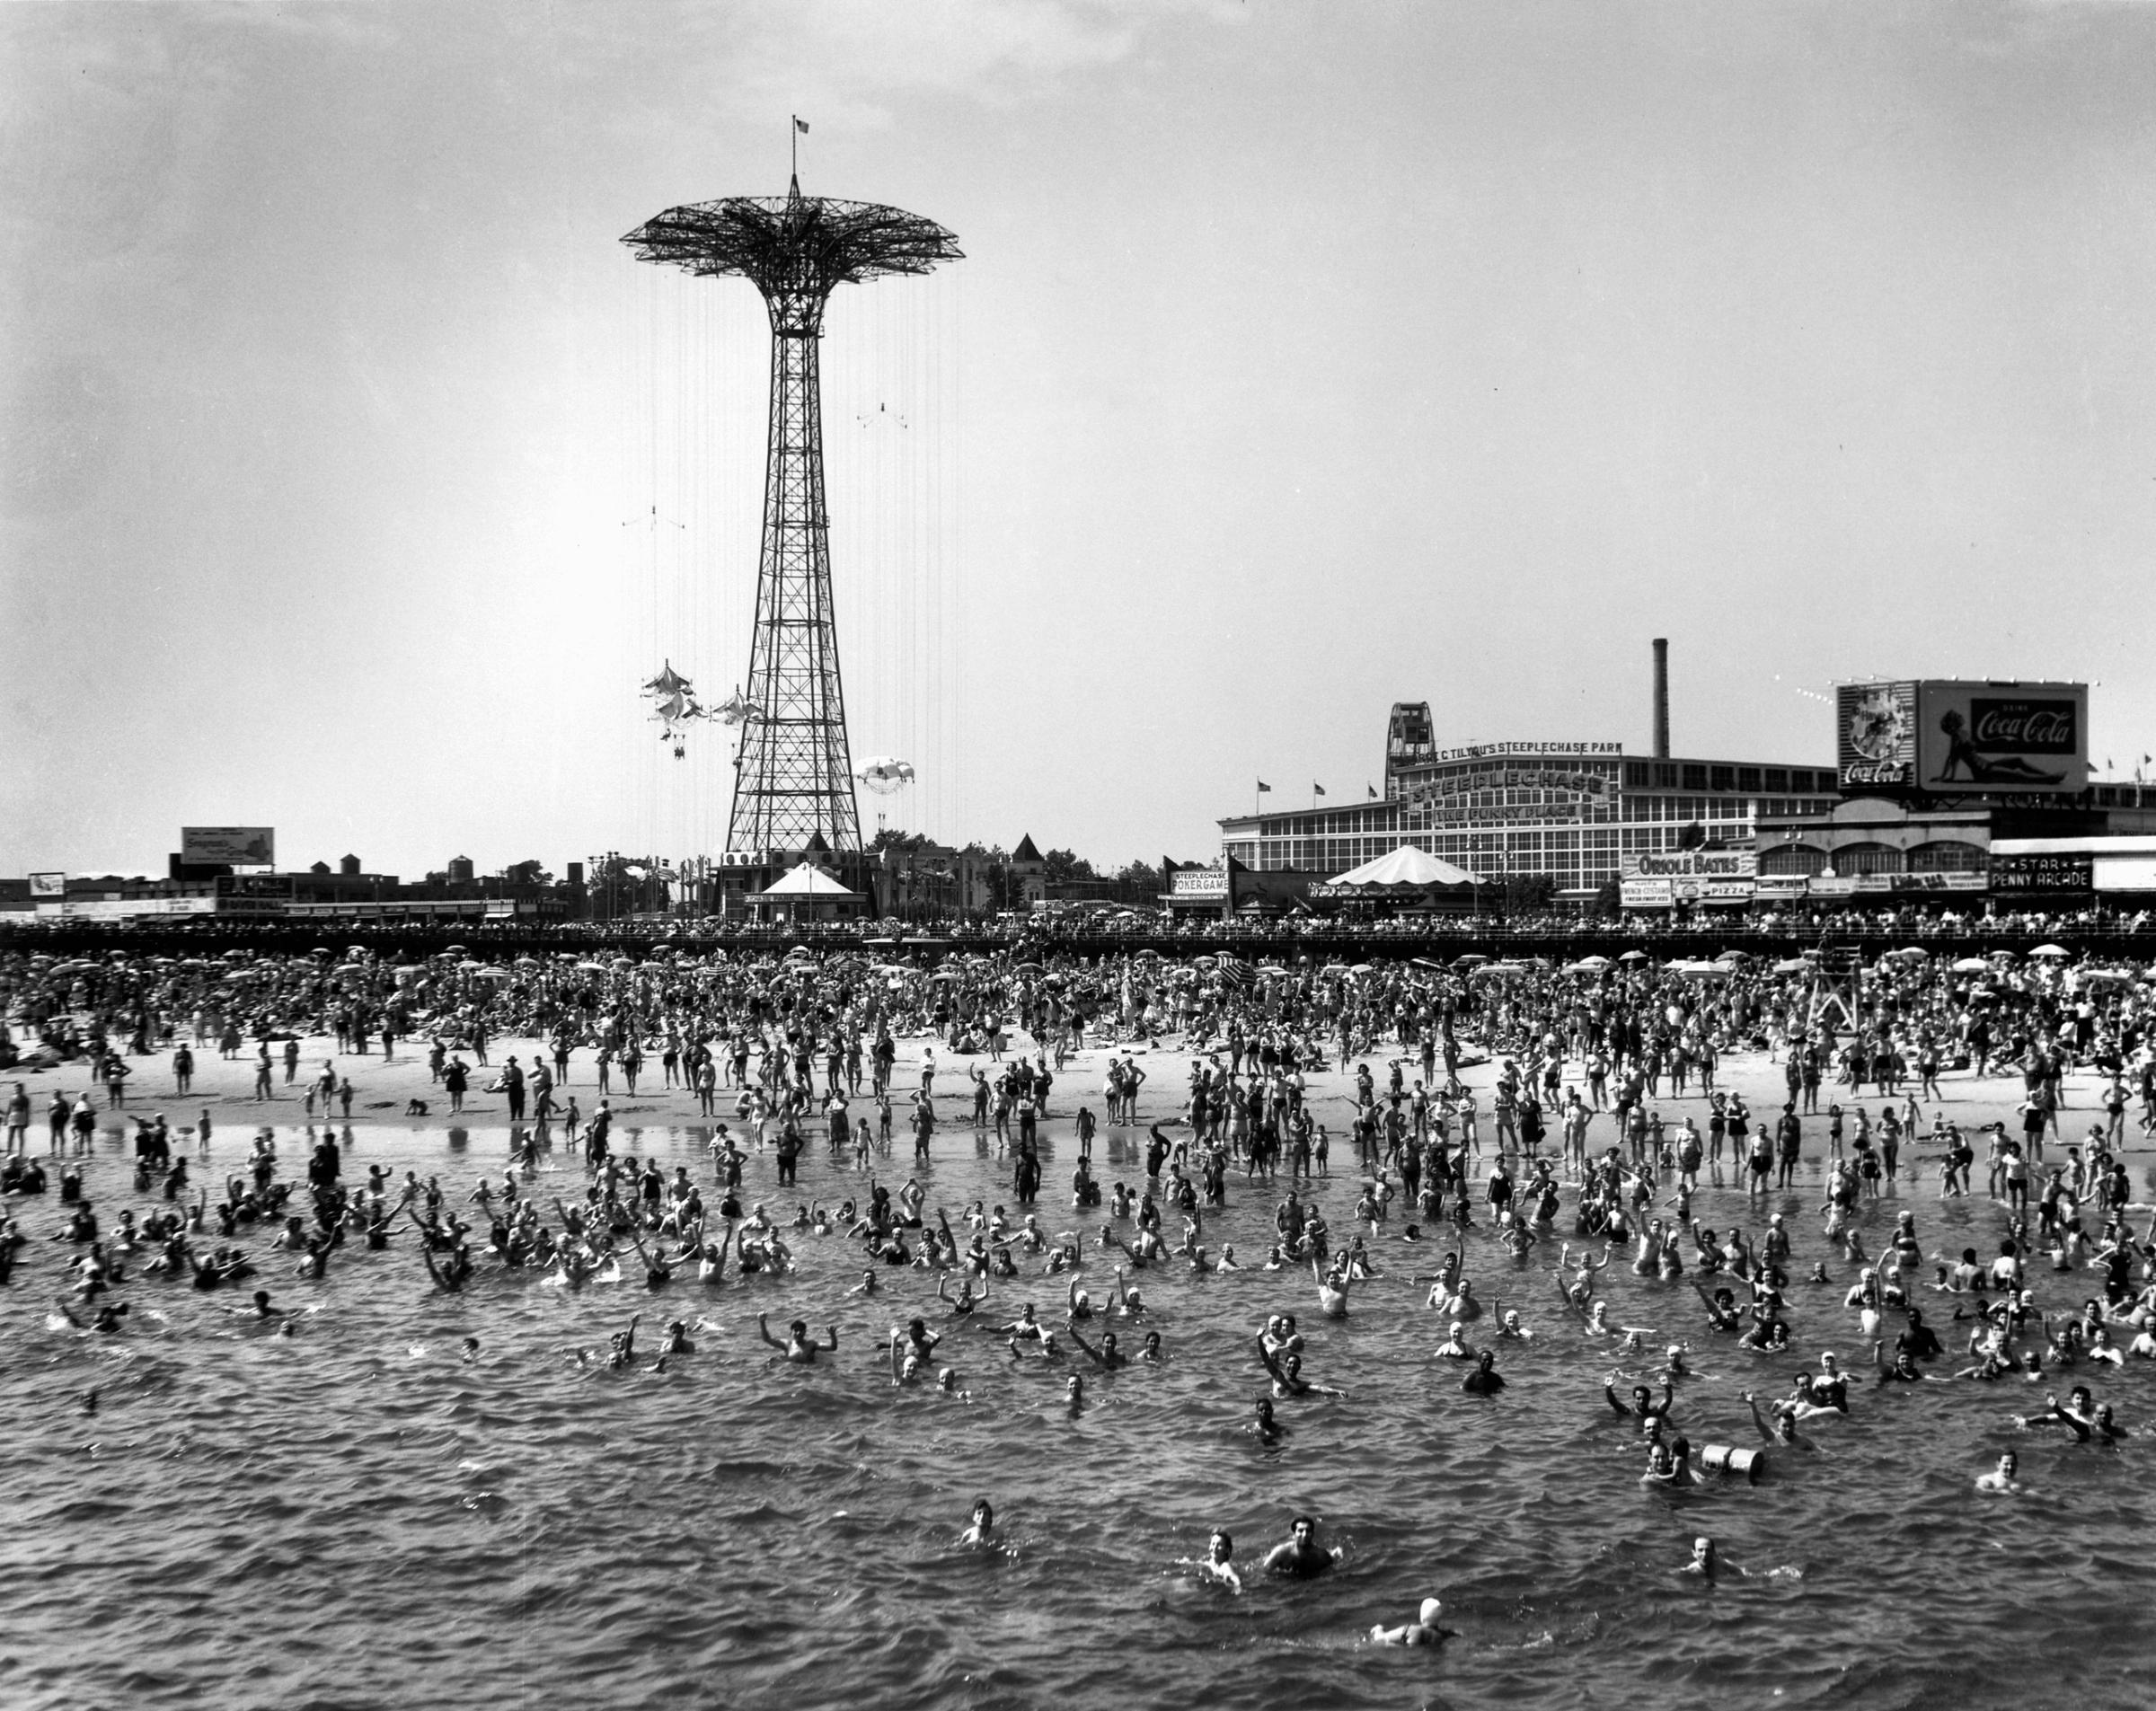 The beach at Coney Island. The parachute ride is visible in the background, 1952.